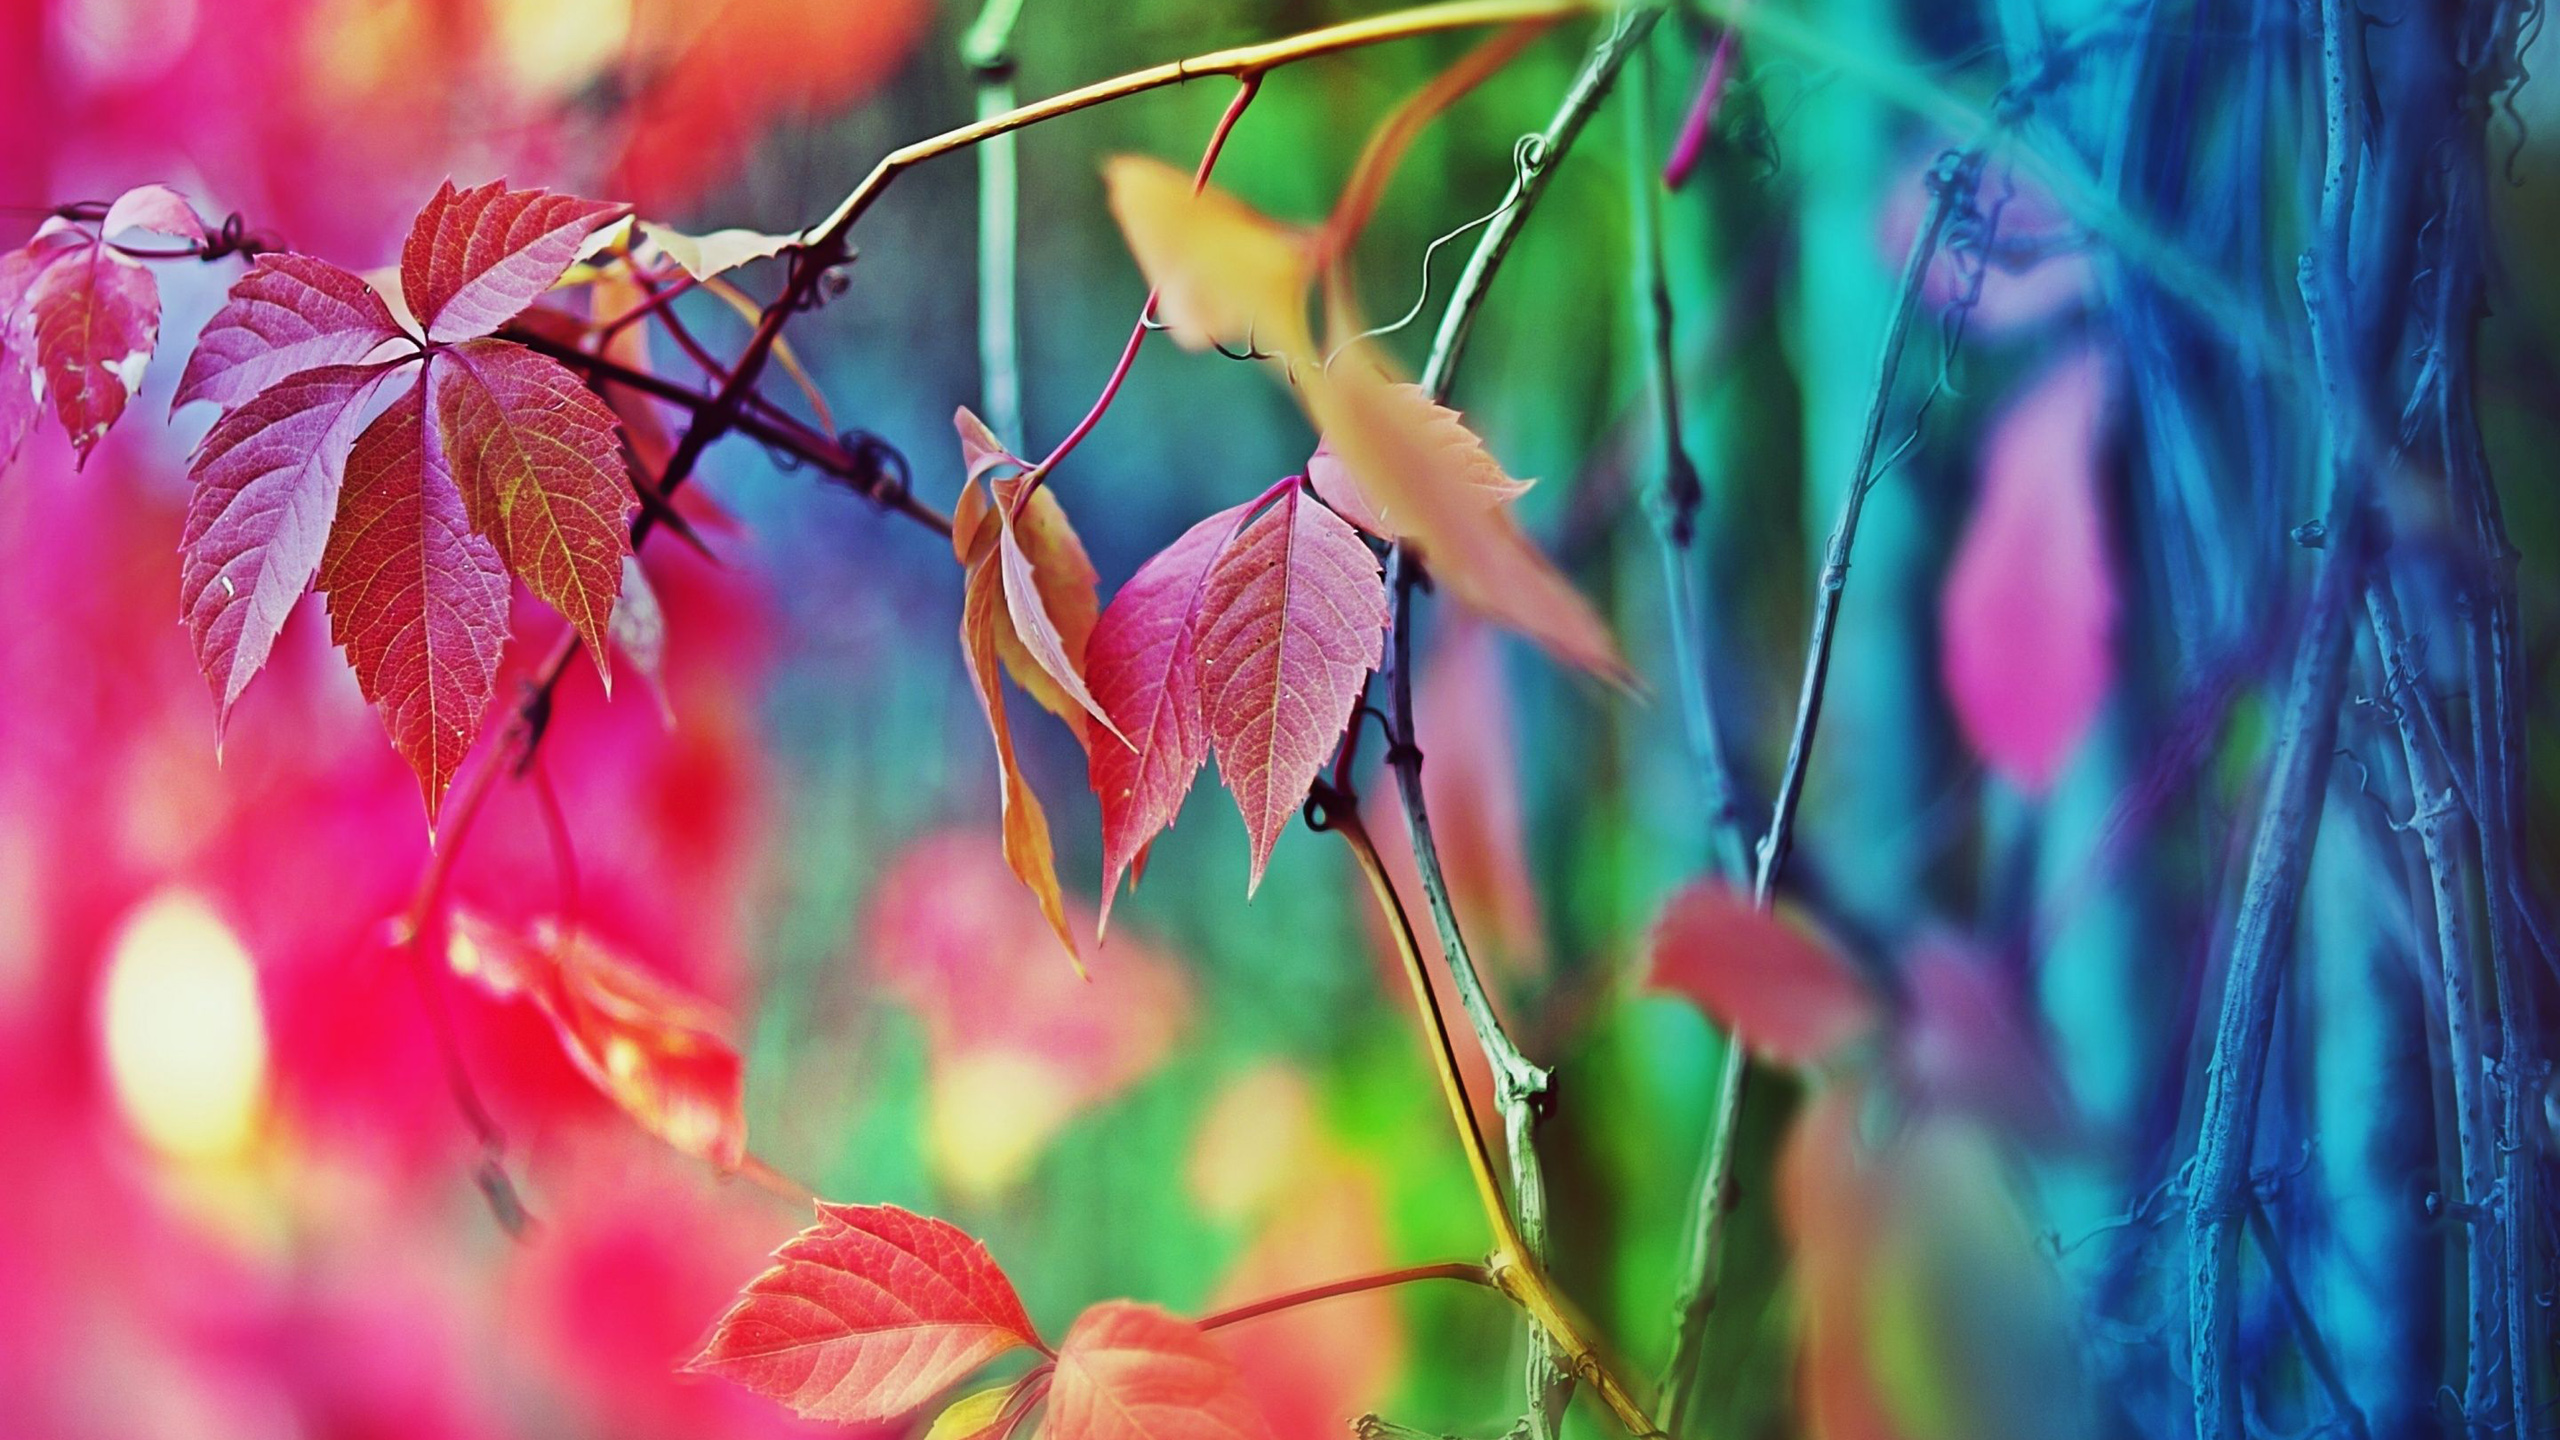 Colorful Leaves Plants In Blur Wallpaper HD Colorful